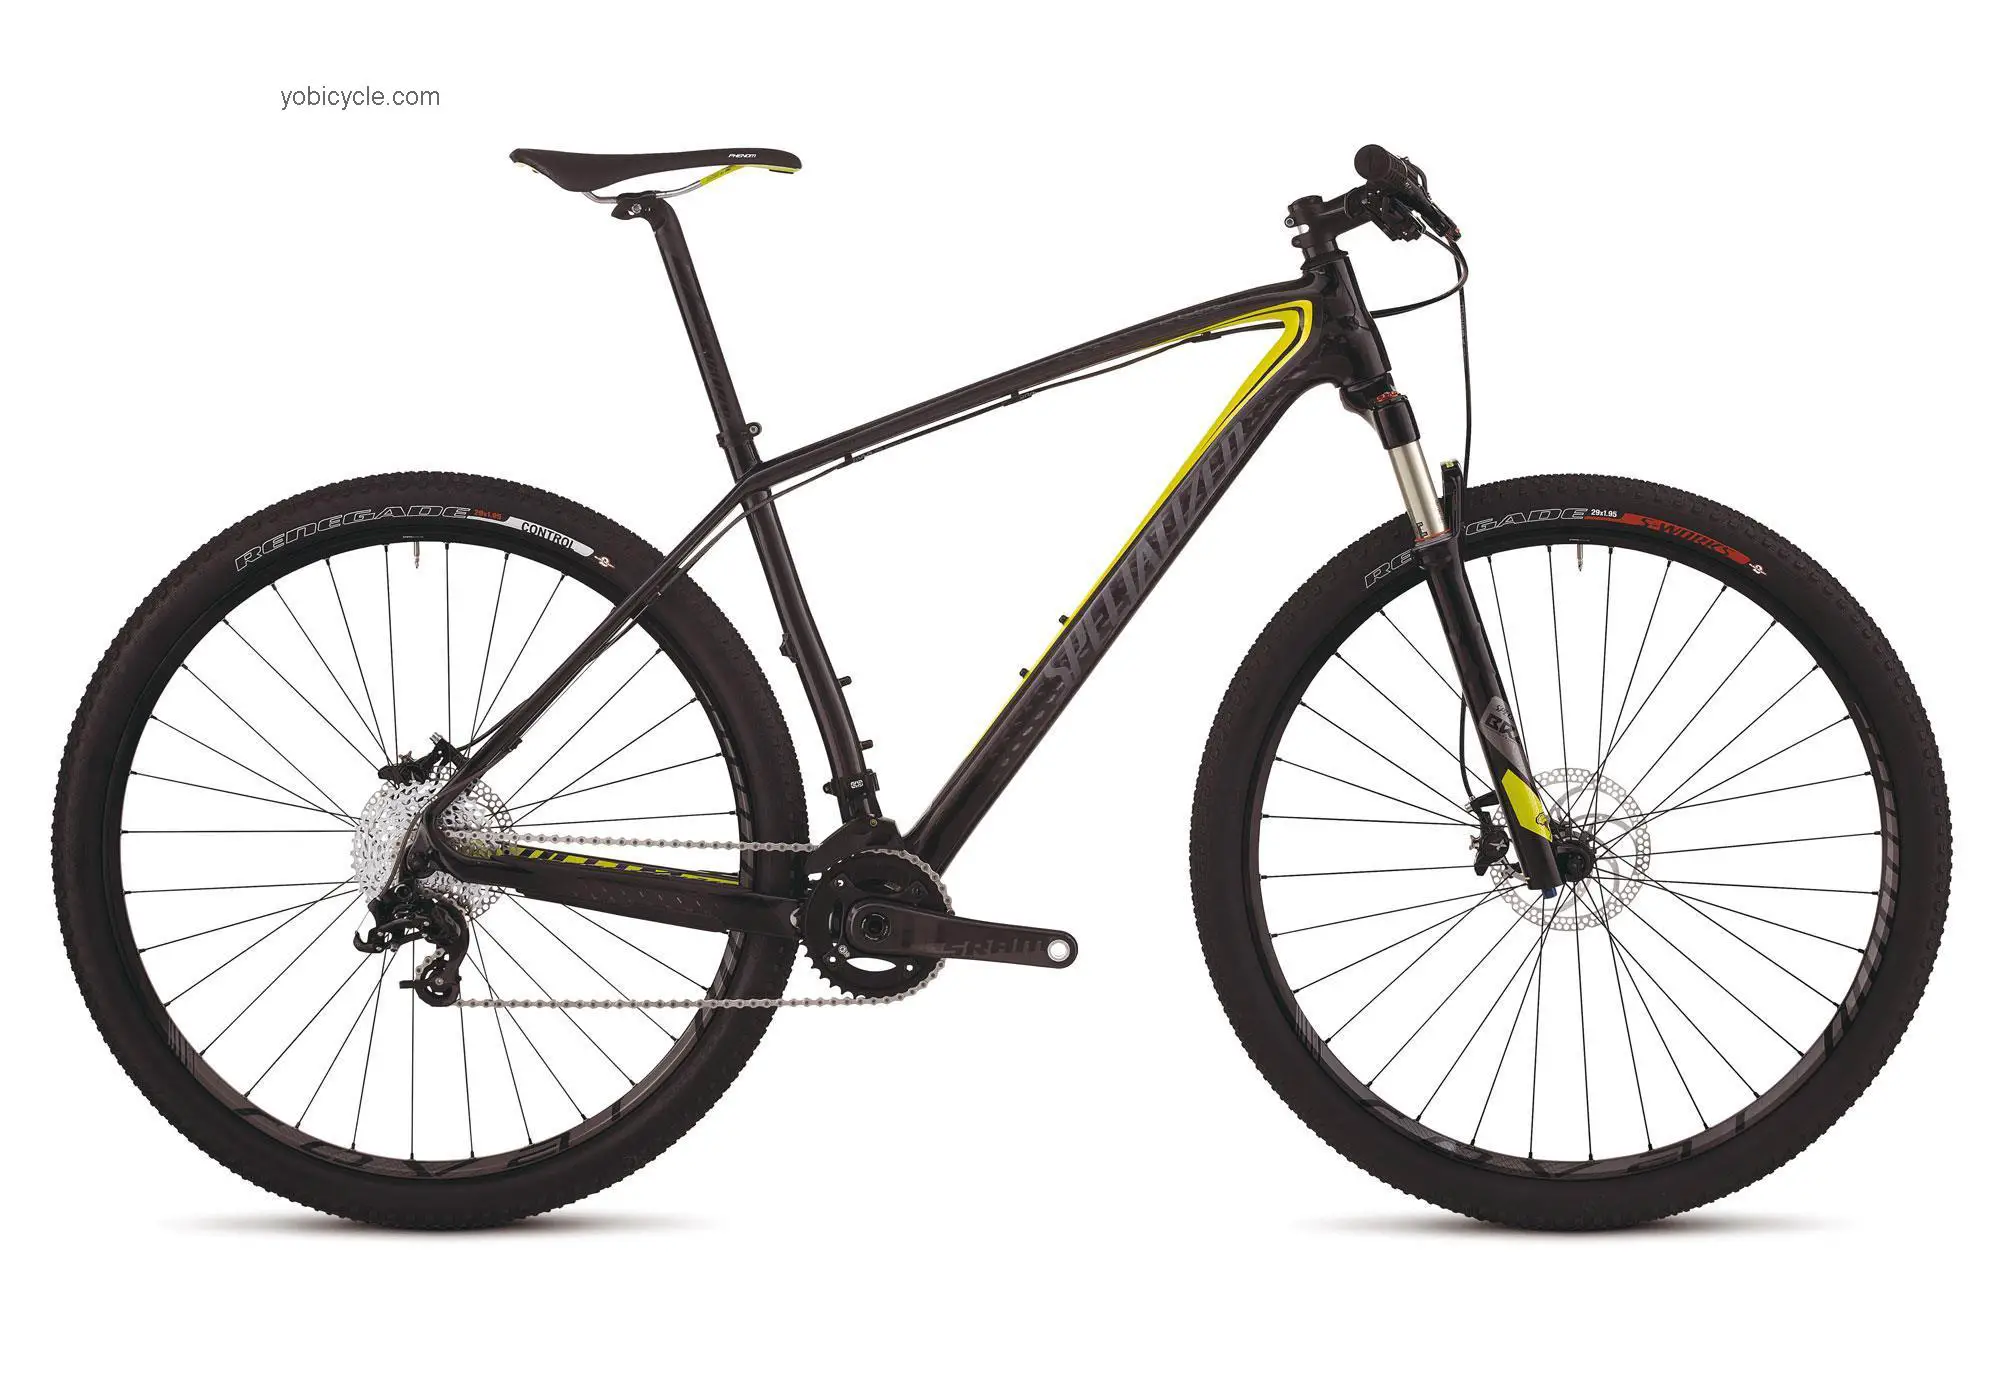 Specialized Stumpjumper HT Expert Carbon Evo R2 2012 comparison online with competitors